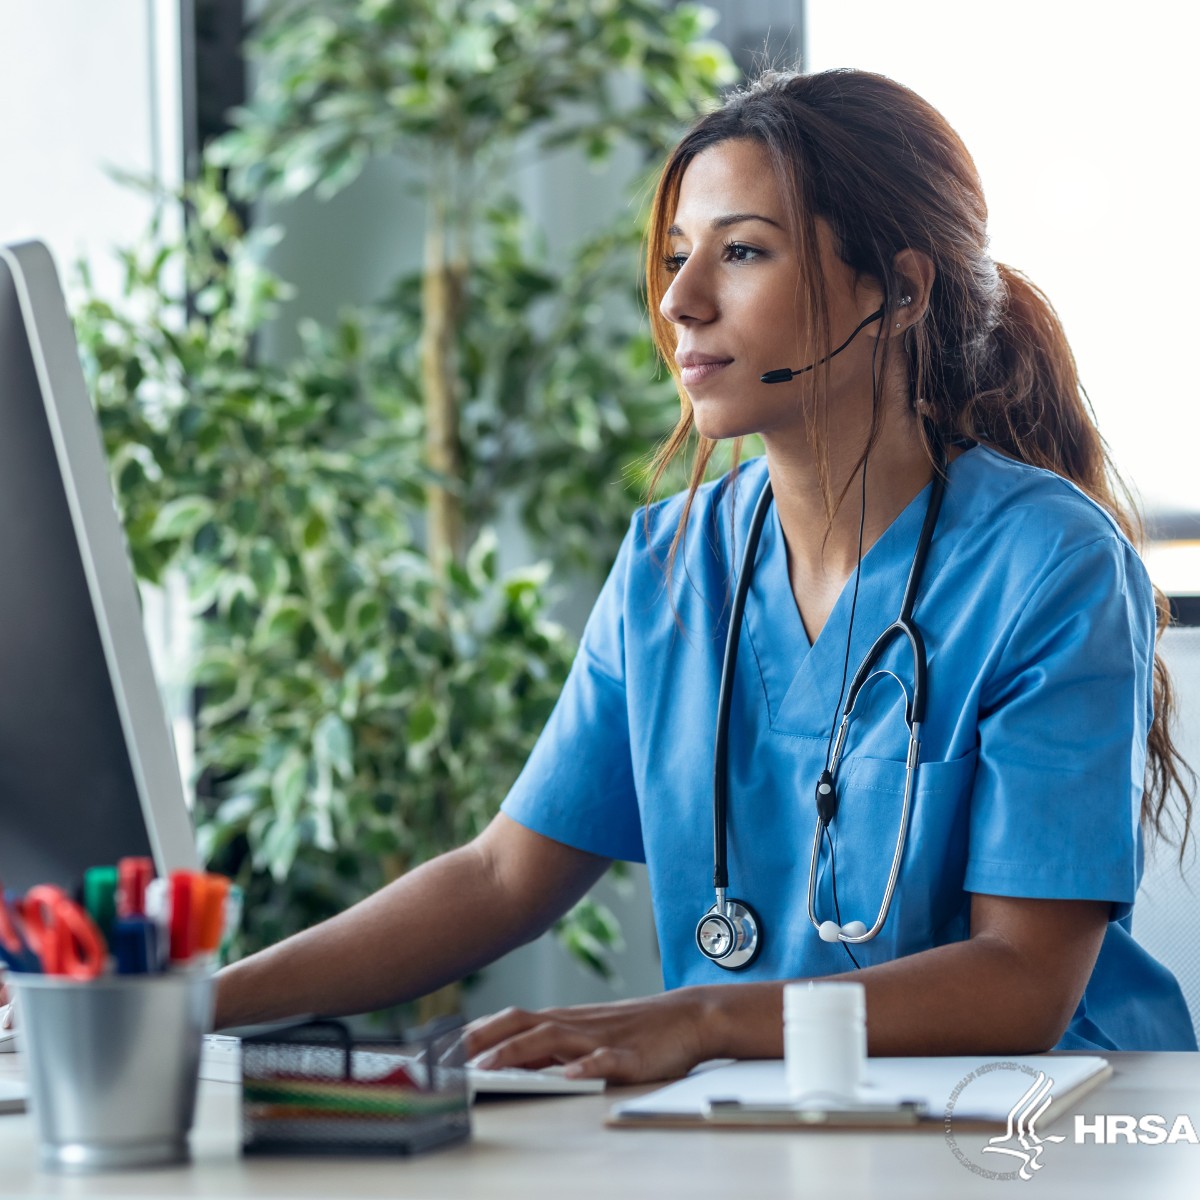 Want quick access to all our telehealth resources on Telehealth.HHS.gov? Easily search for telehealth topics and resources like tip sheets and videos with our new Featured Resources page: bit.ly/3u0B6rN